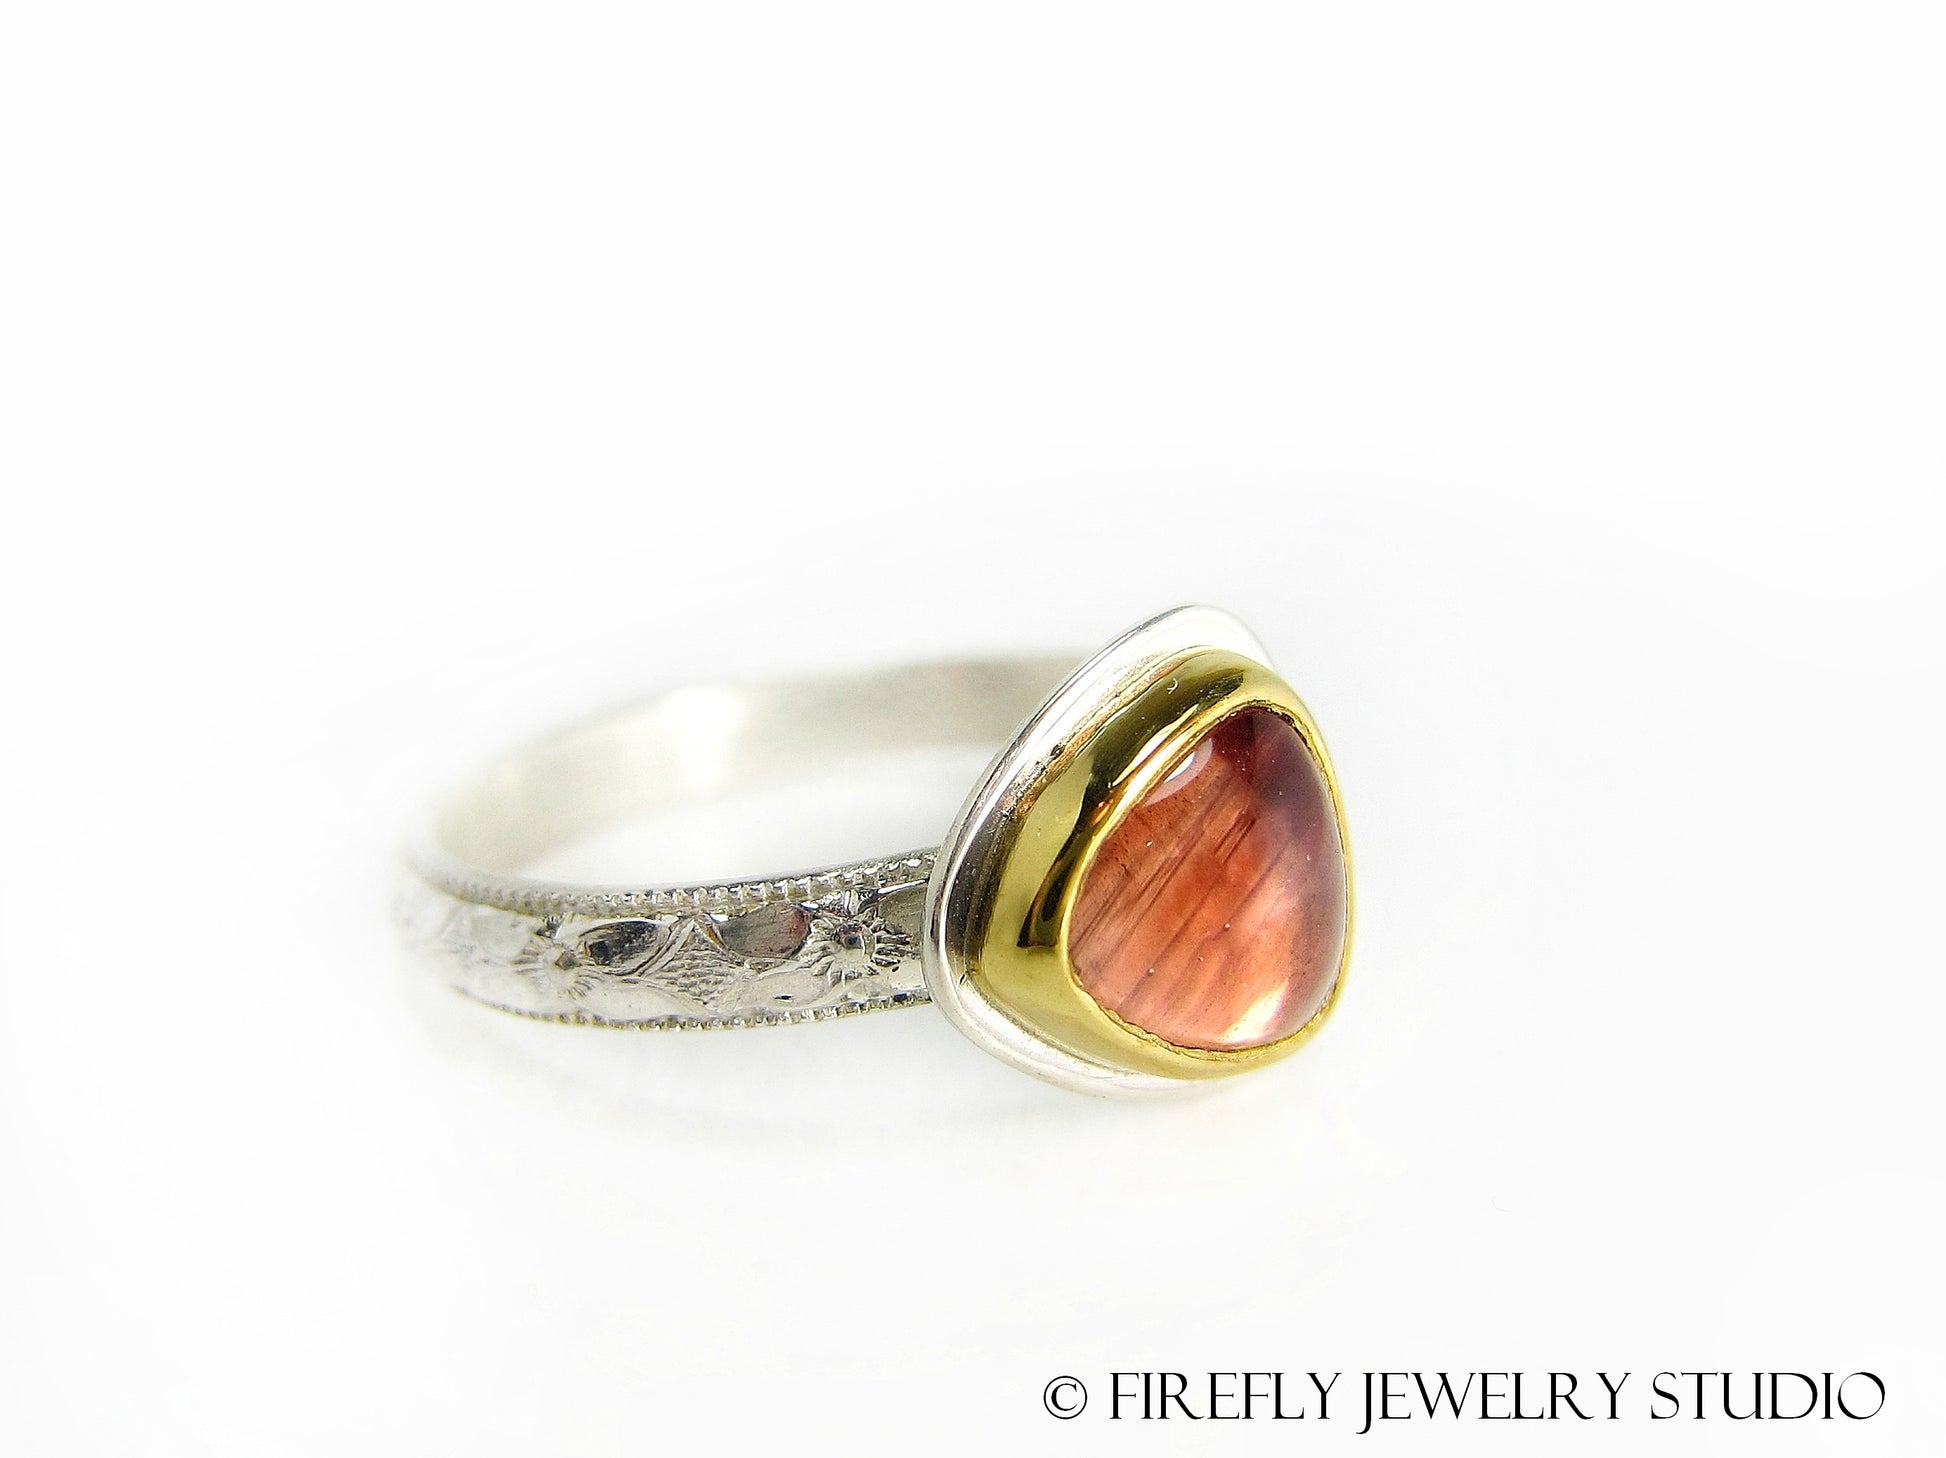 Sunstone Trine Ring in 24k Gold and Sterling. Size 7.75 - Firefly Jewelry Studio